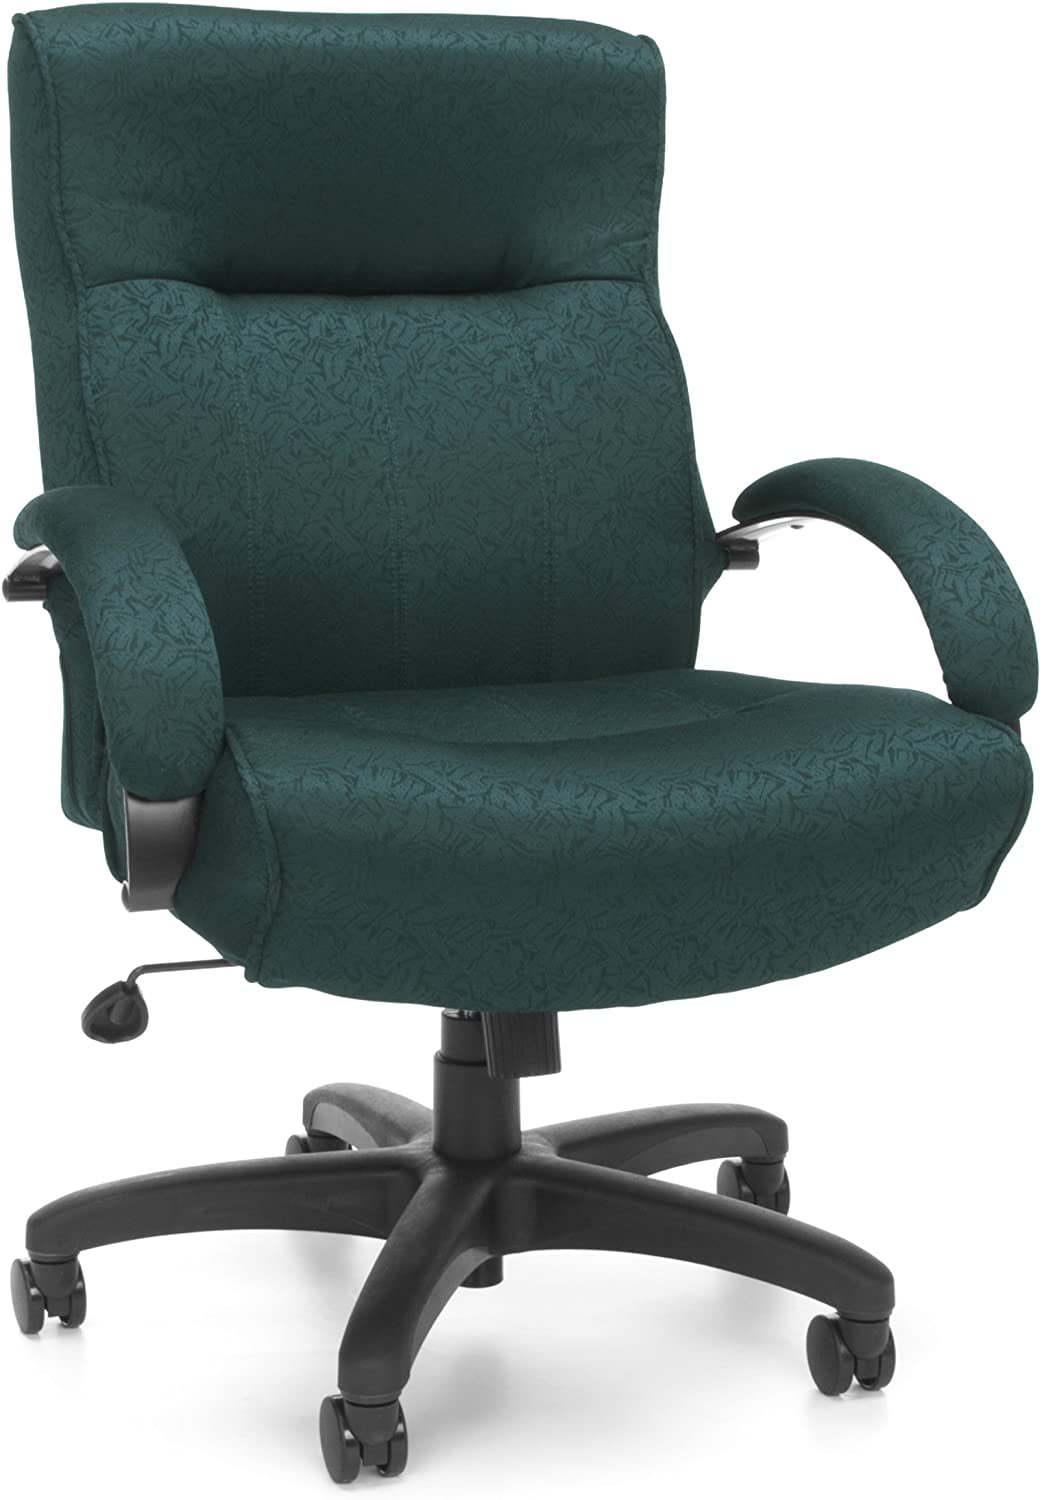 Mid-Back Fabric Conference and Office Chair 711-302 Teal OFM Big and Tall Fabric Executive Chair 